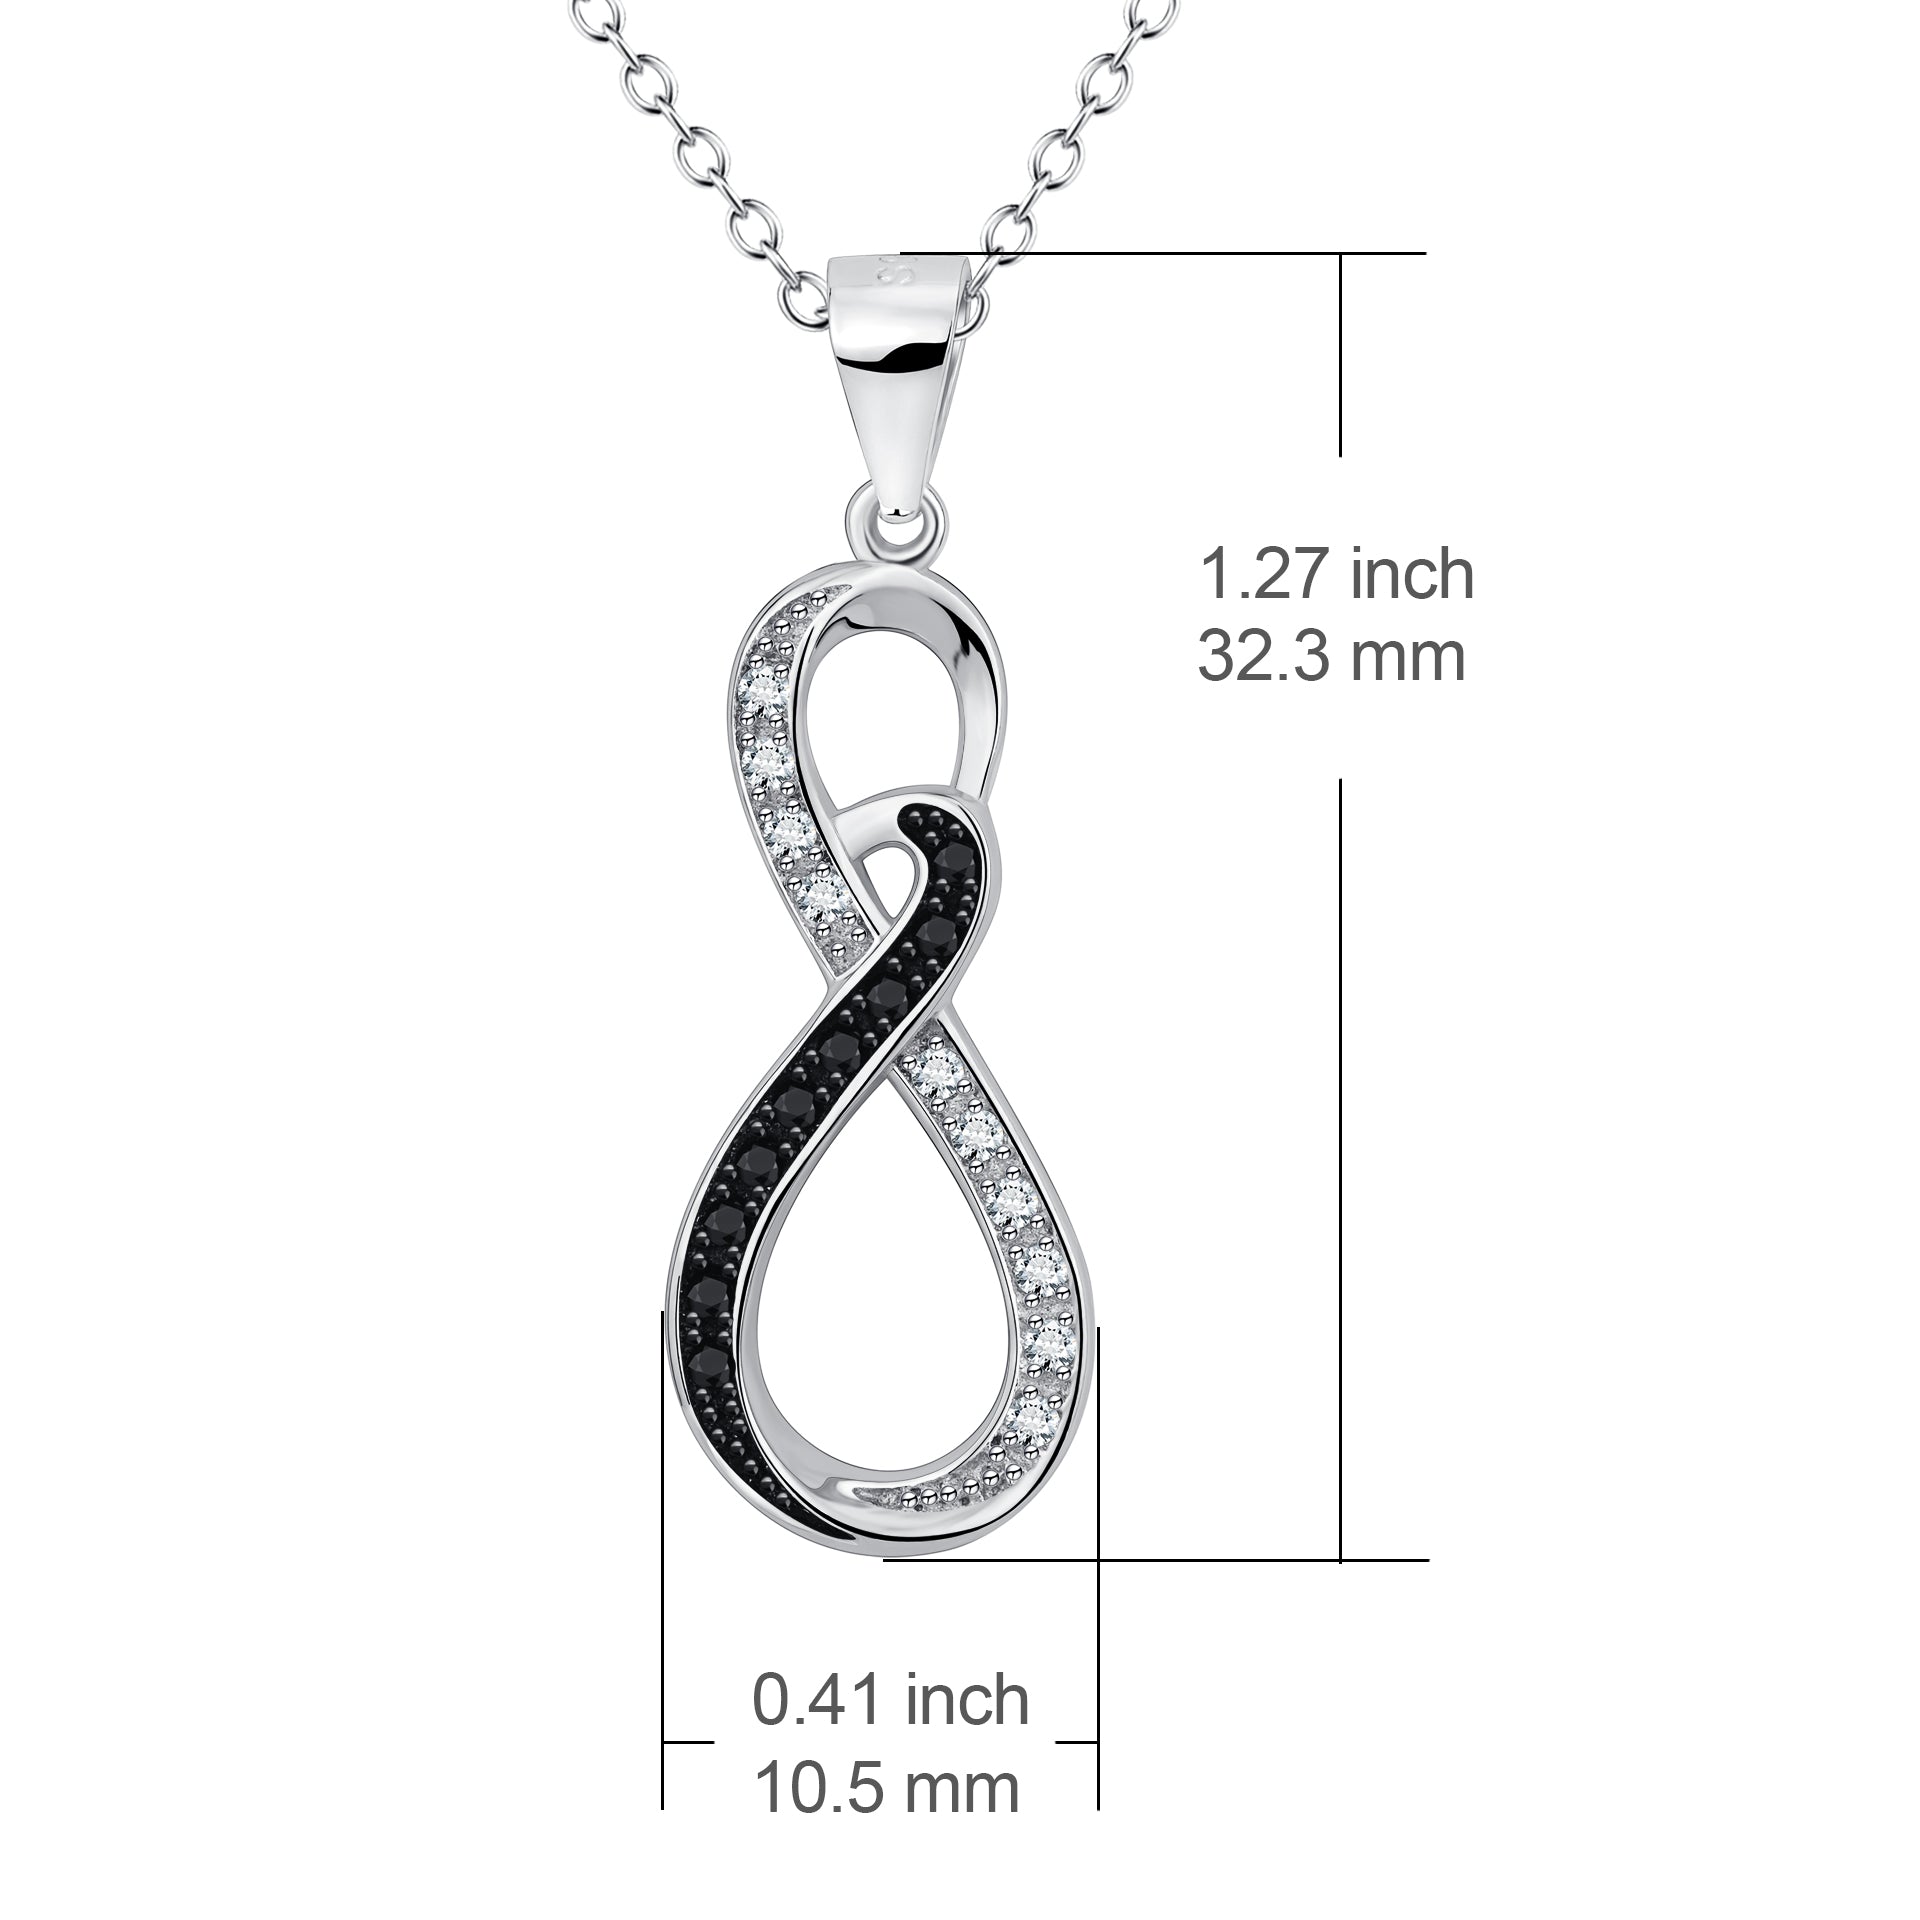 Hollow Eight Necklace New Arrival Silver Number Eight Vertical Pendant Necklace